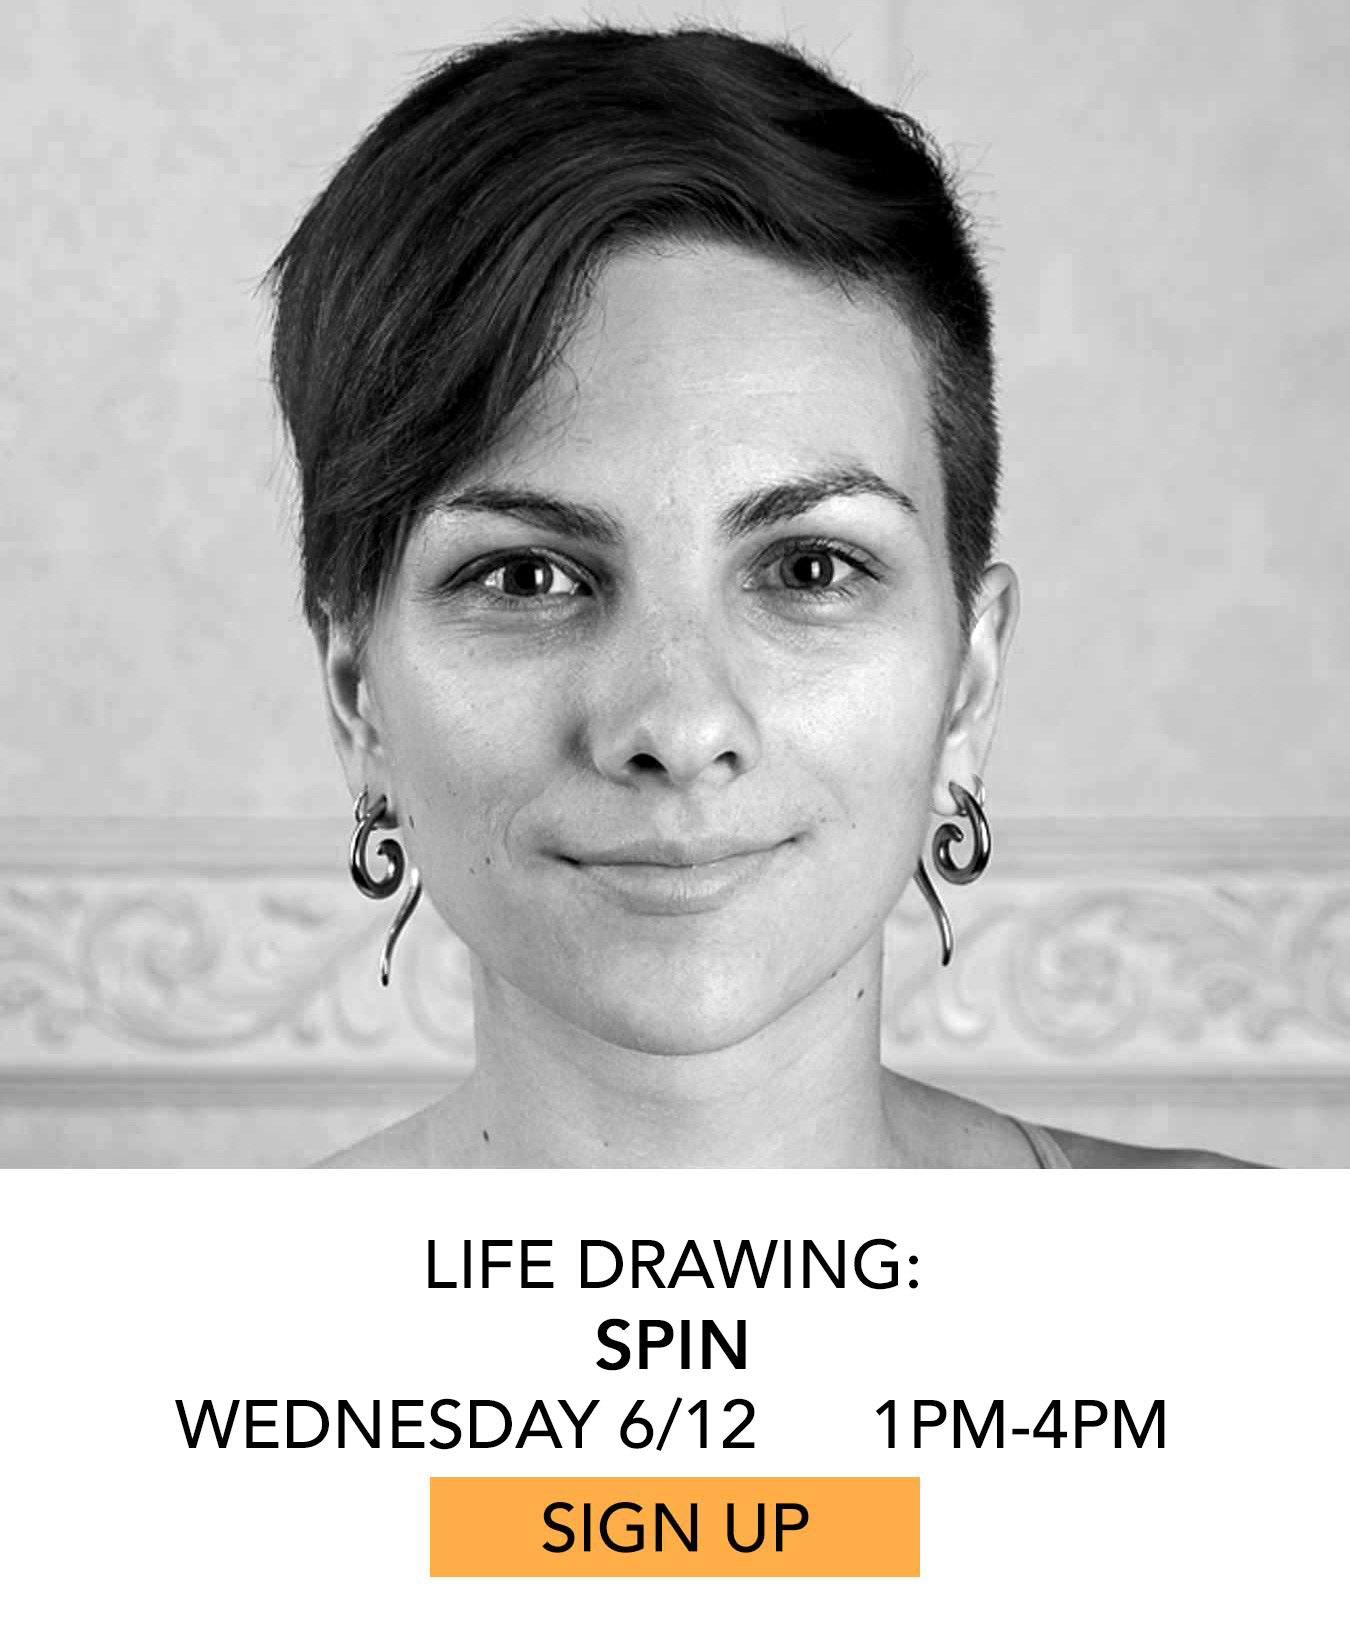 Life Drawing: Spin. Wednesday 6/12 from 1pm to 4pm. Click to Sign Up.